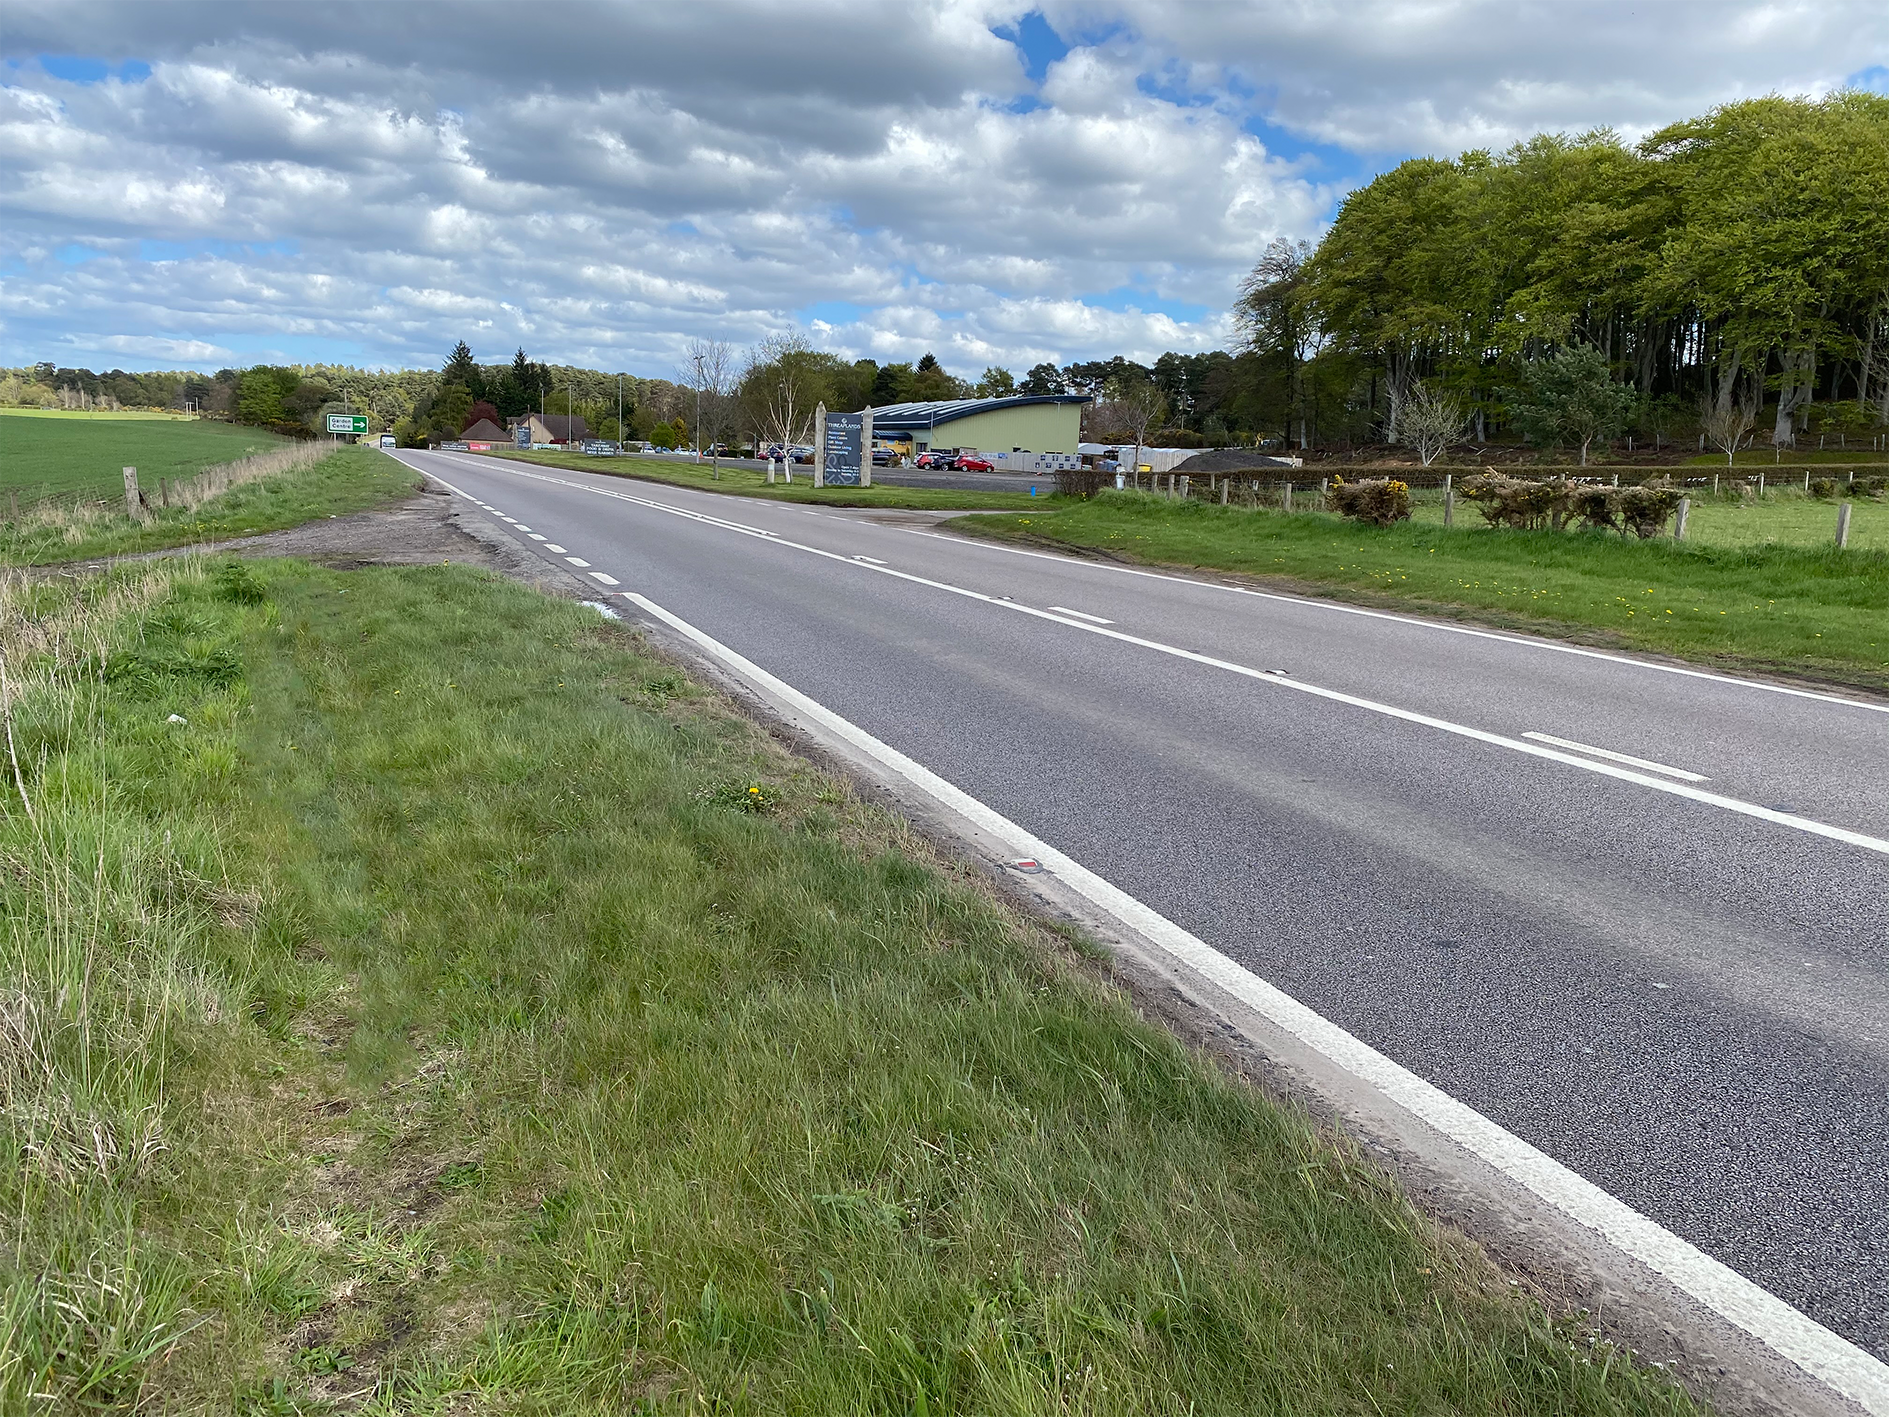 NEW SECTION OF FOOTWAY AND CYCLEWAY PROPOSED FOR SECTION OF A96 NEAR LHANBRYDE